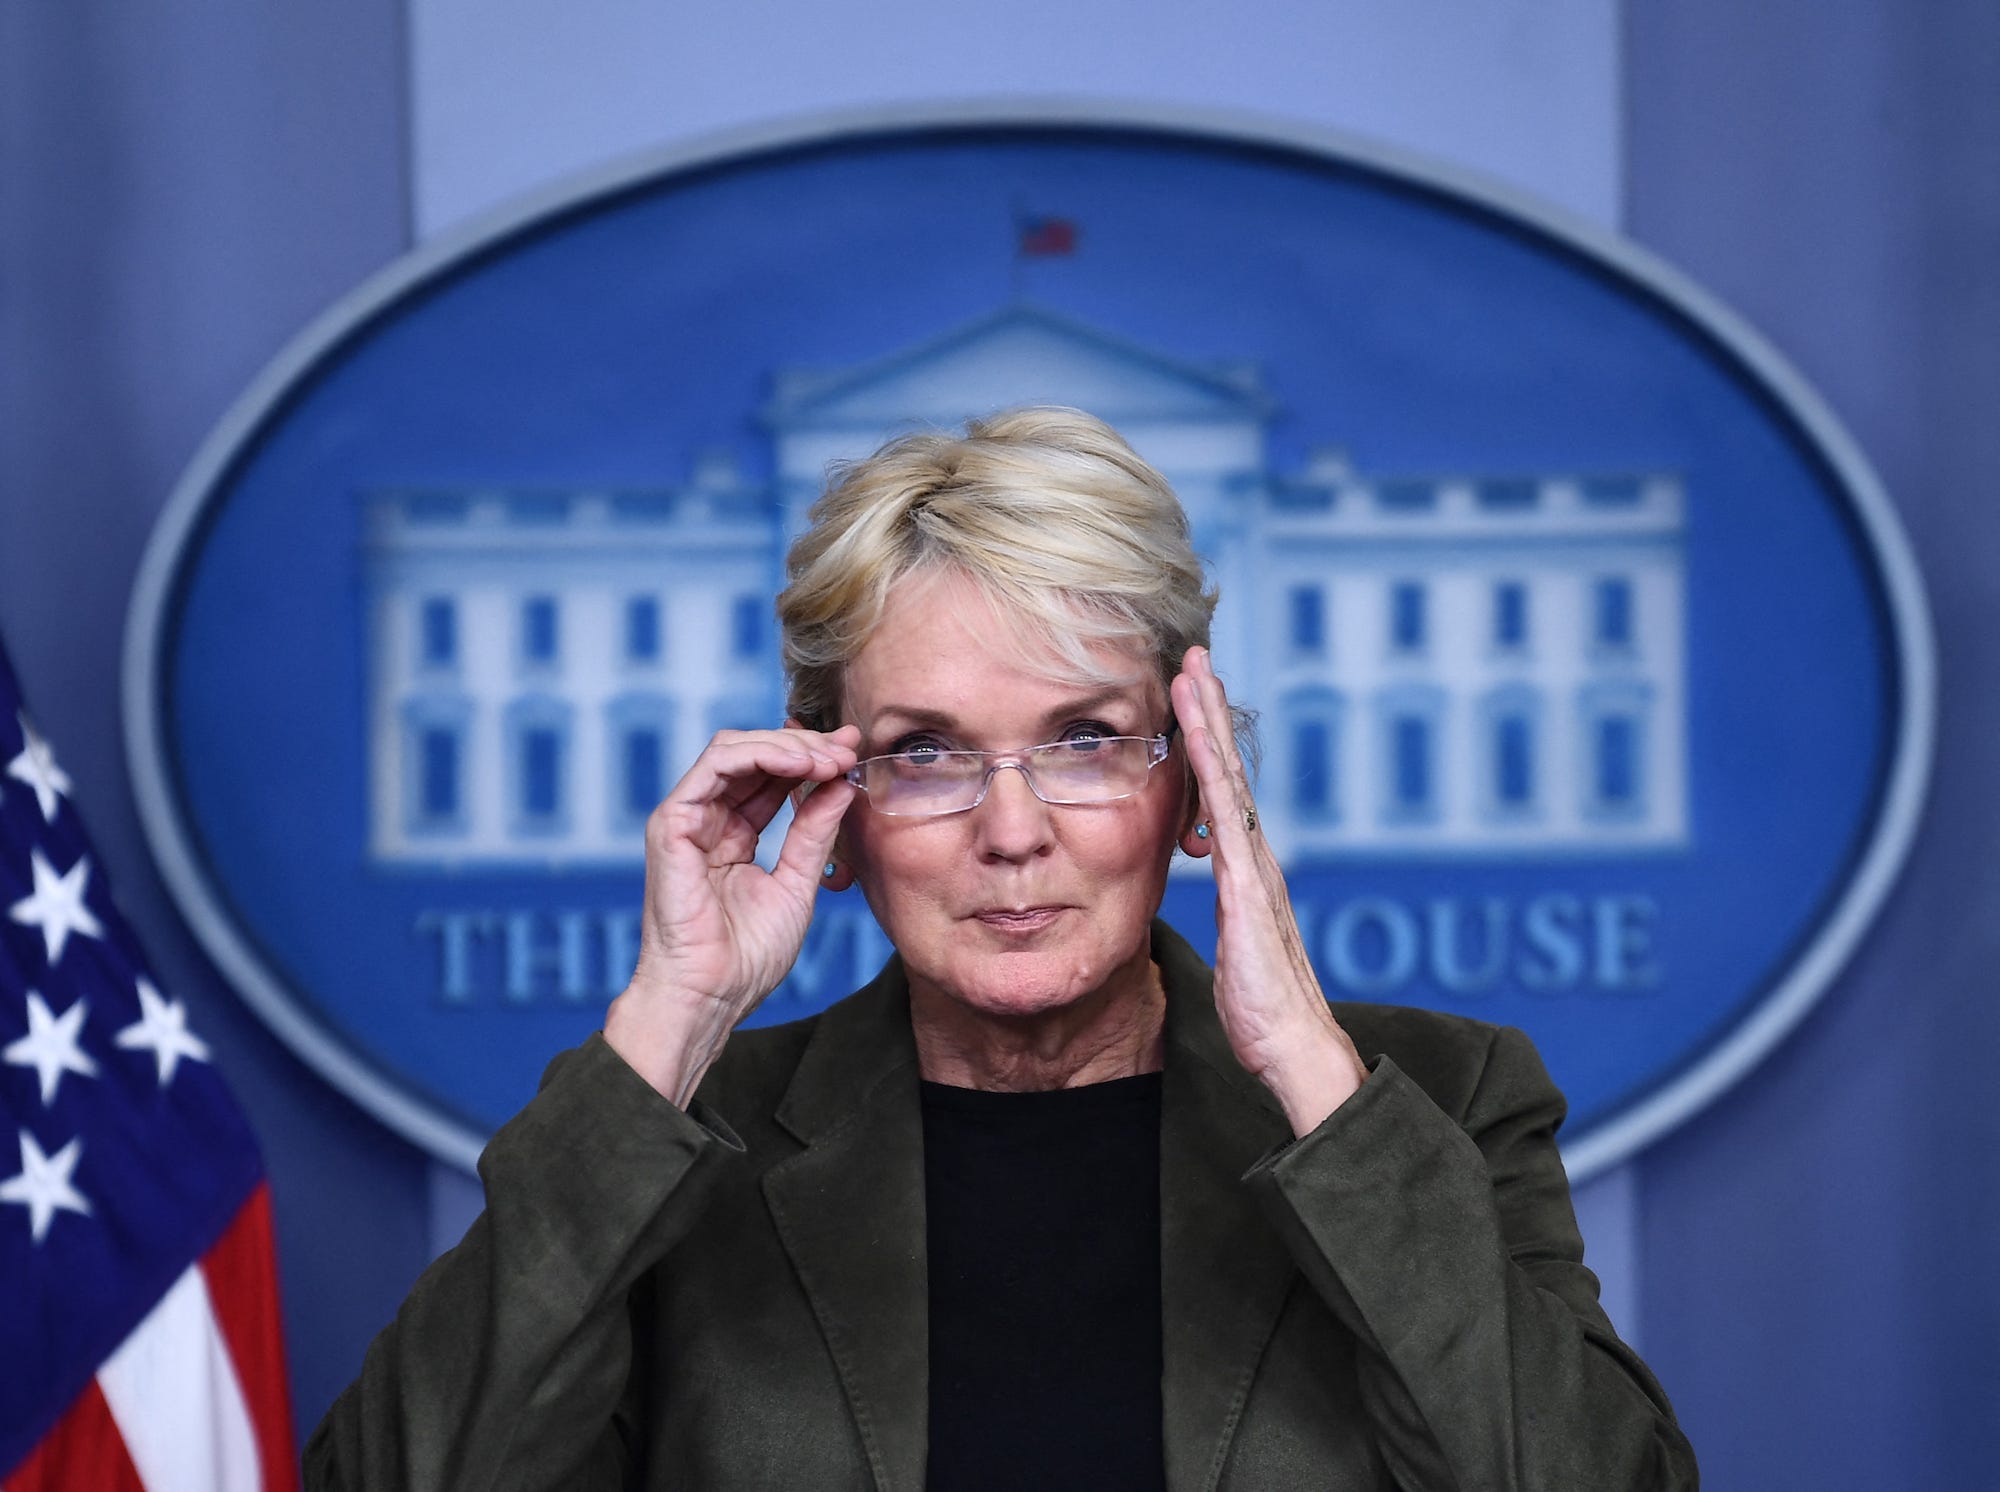 Energy Secretary Jennifer Granholm adjusts her glasses while speaking during a White House press briefing.